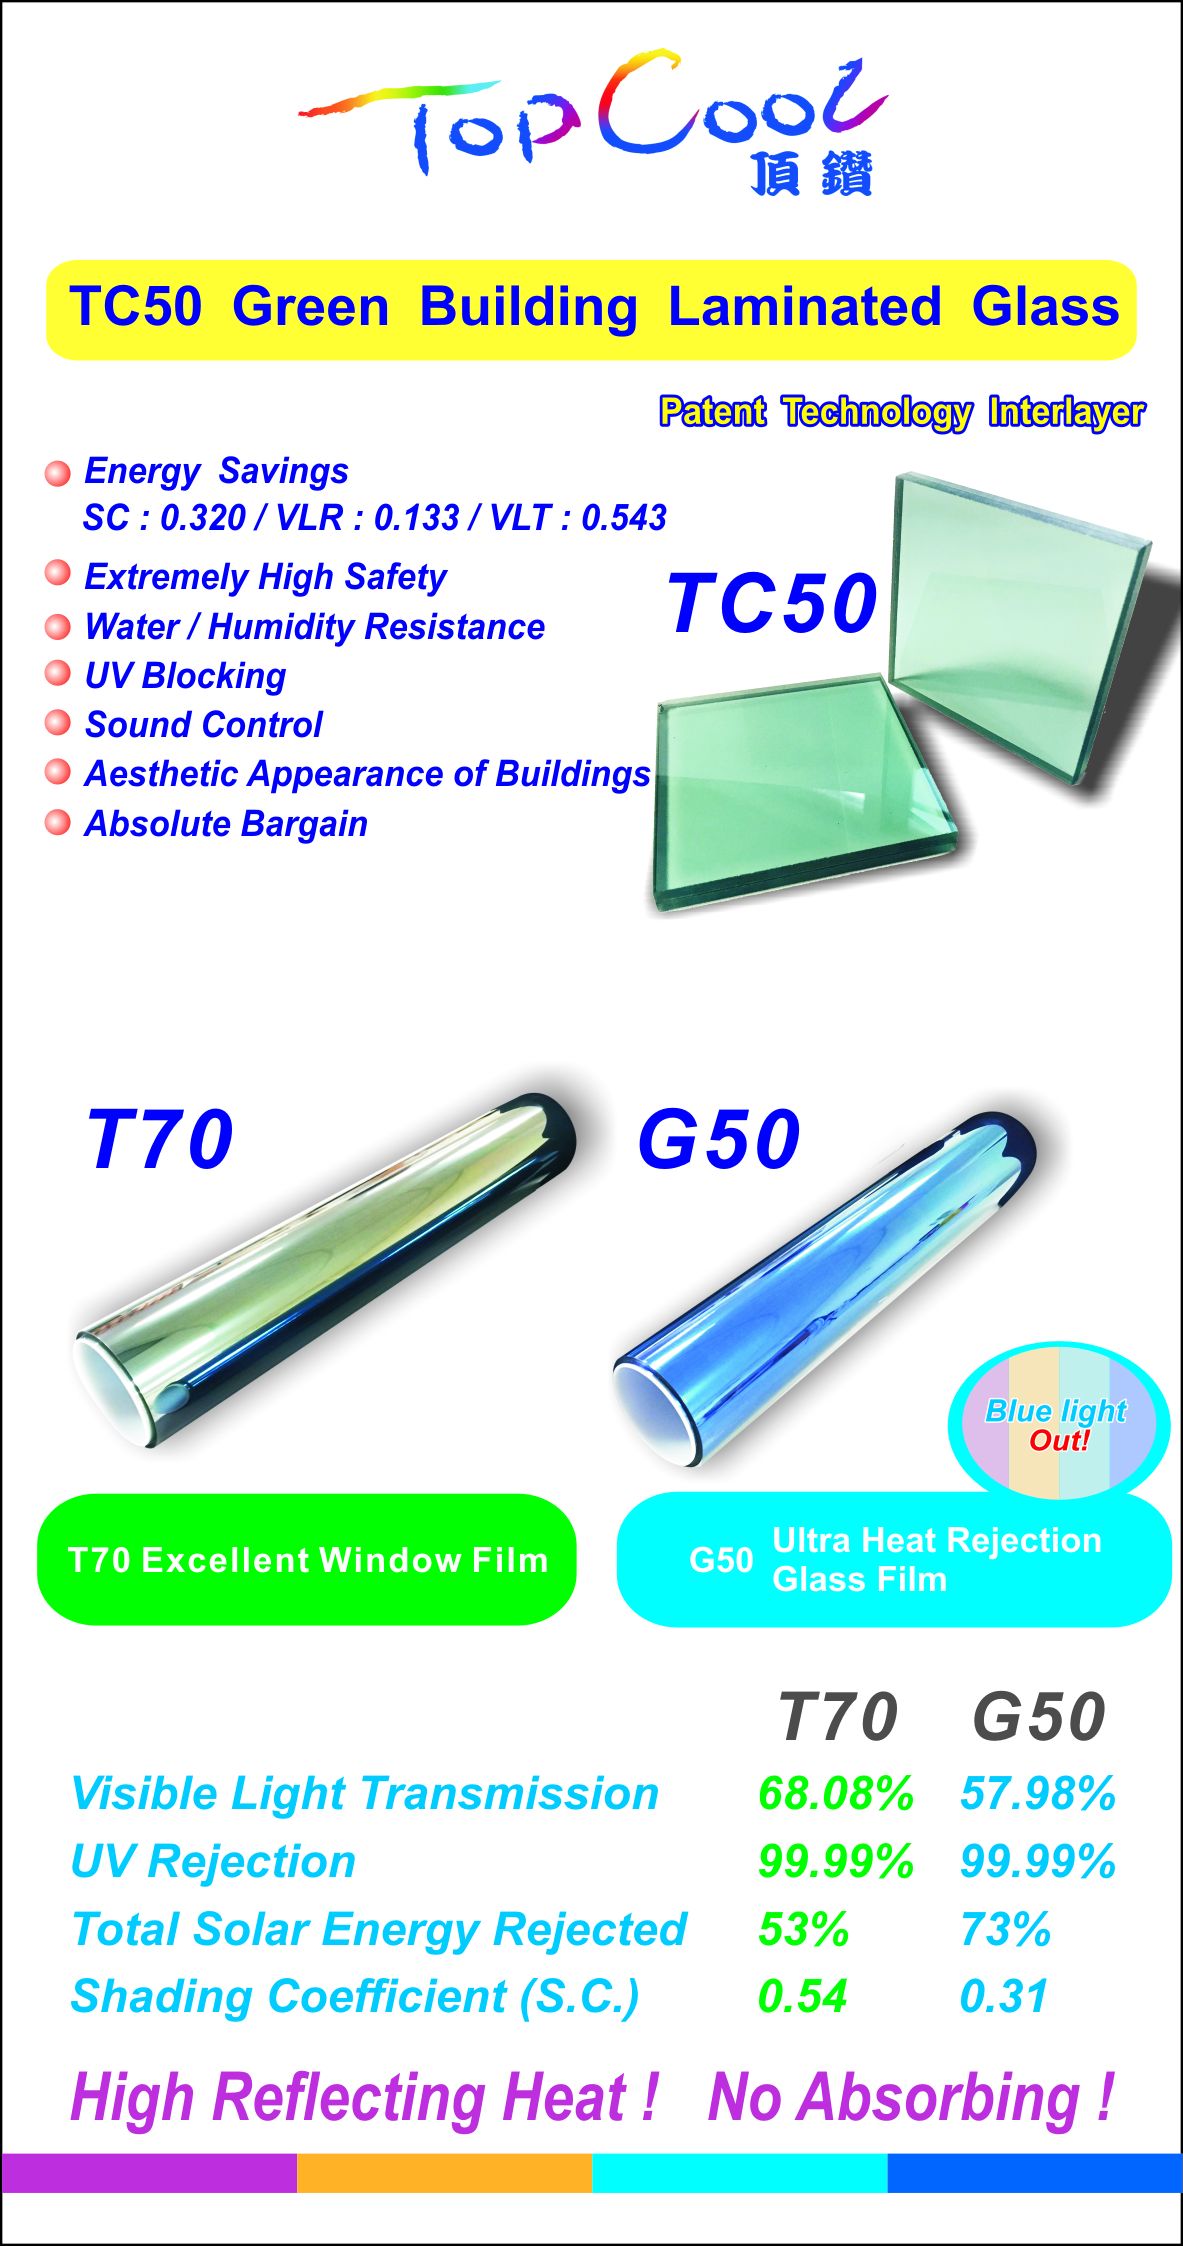 2019 Taipei Buildling Show we will showcase the latest performance laminated glass & glass films.